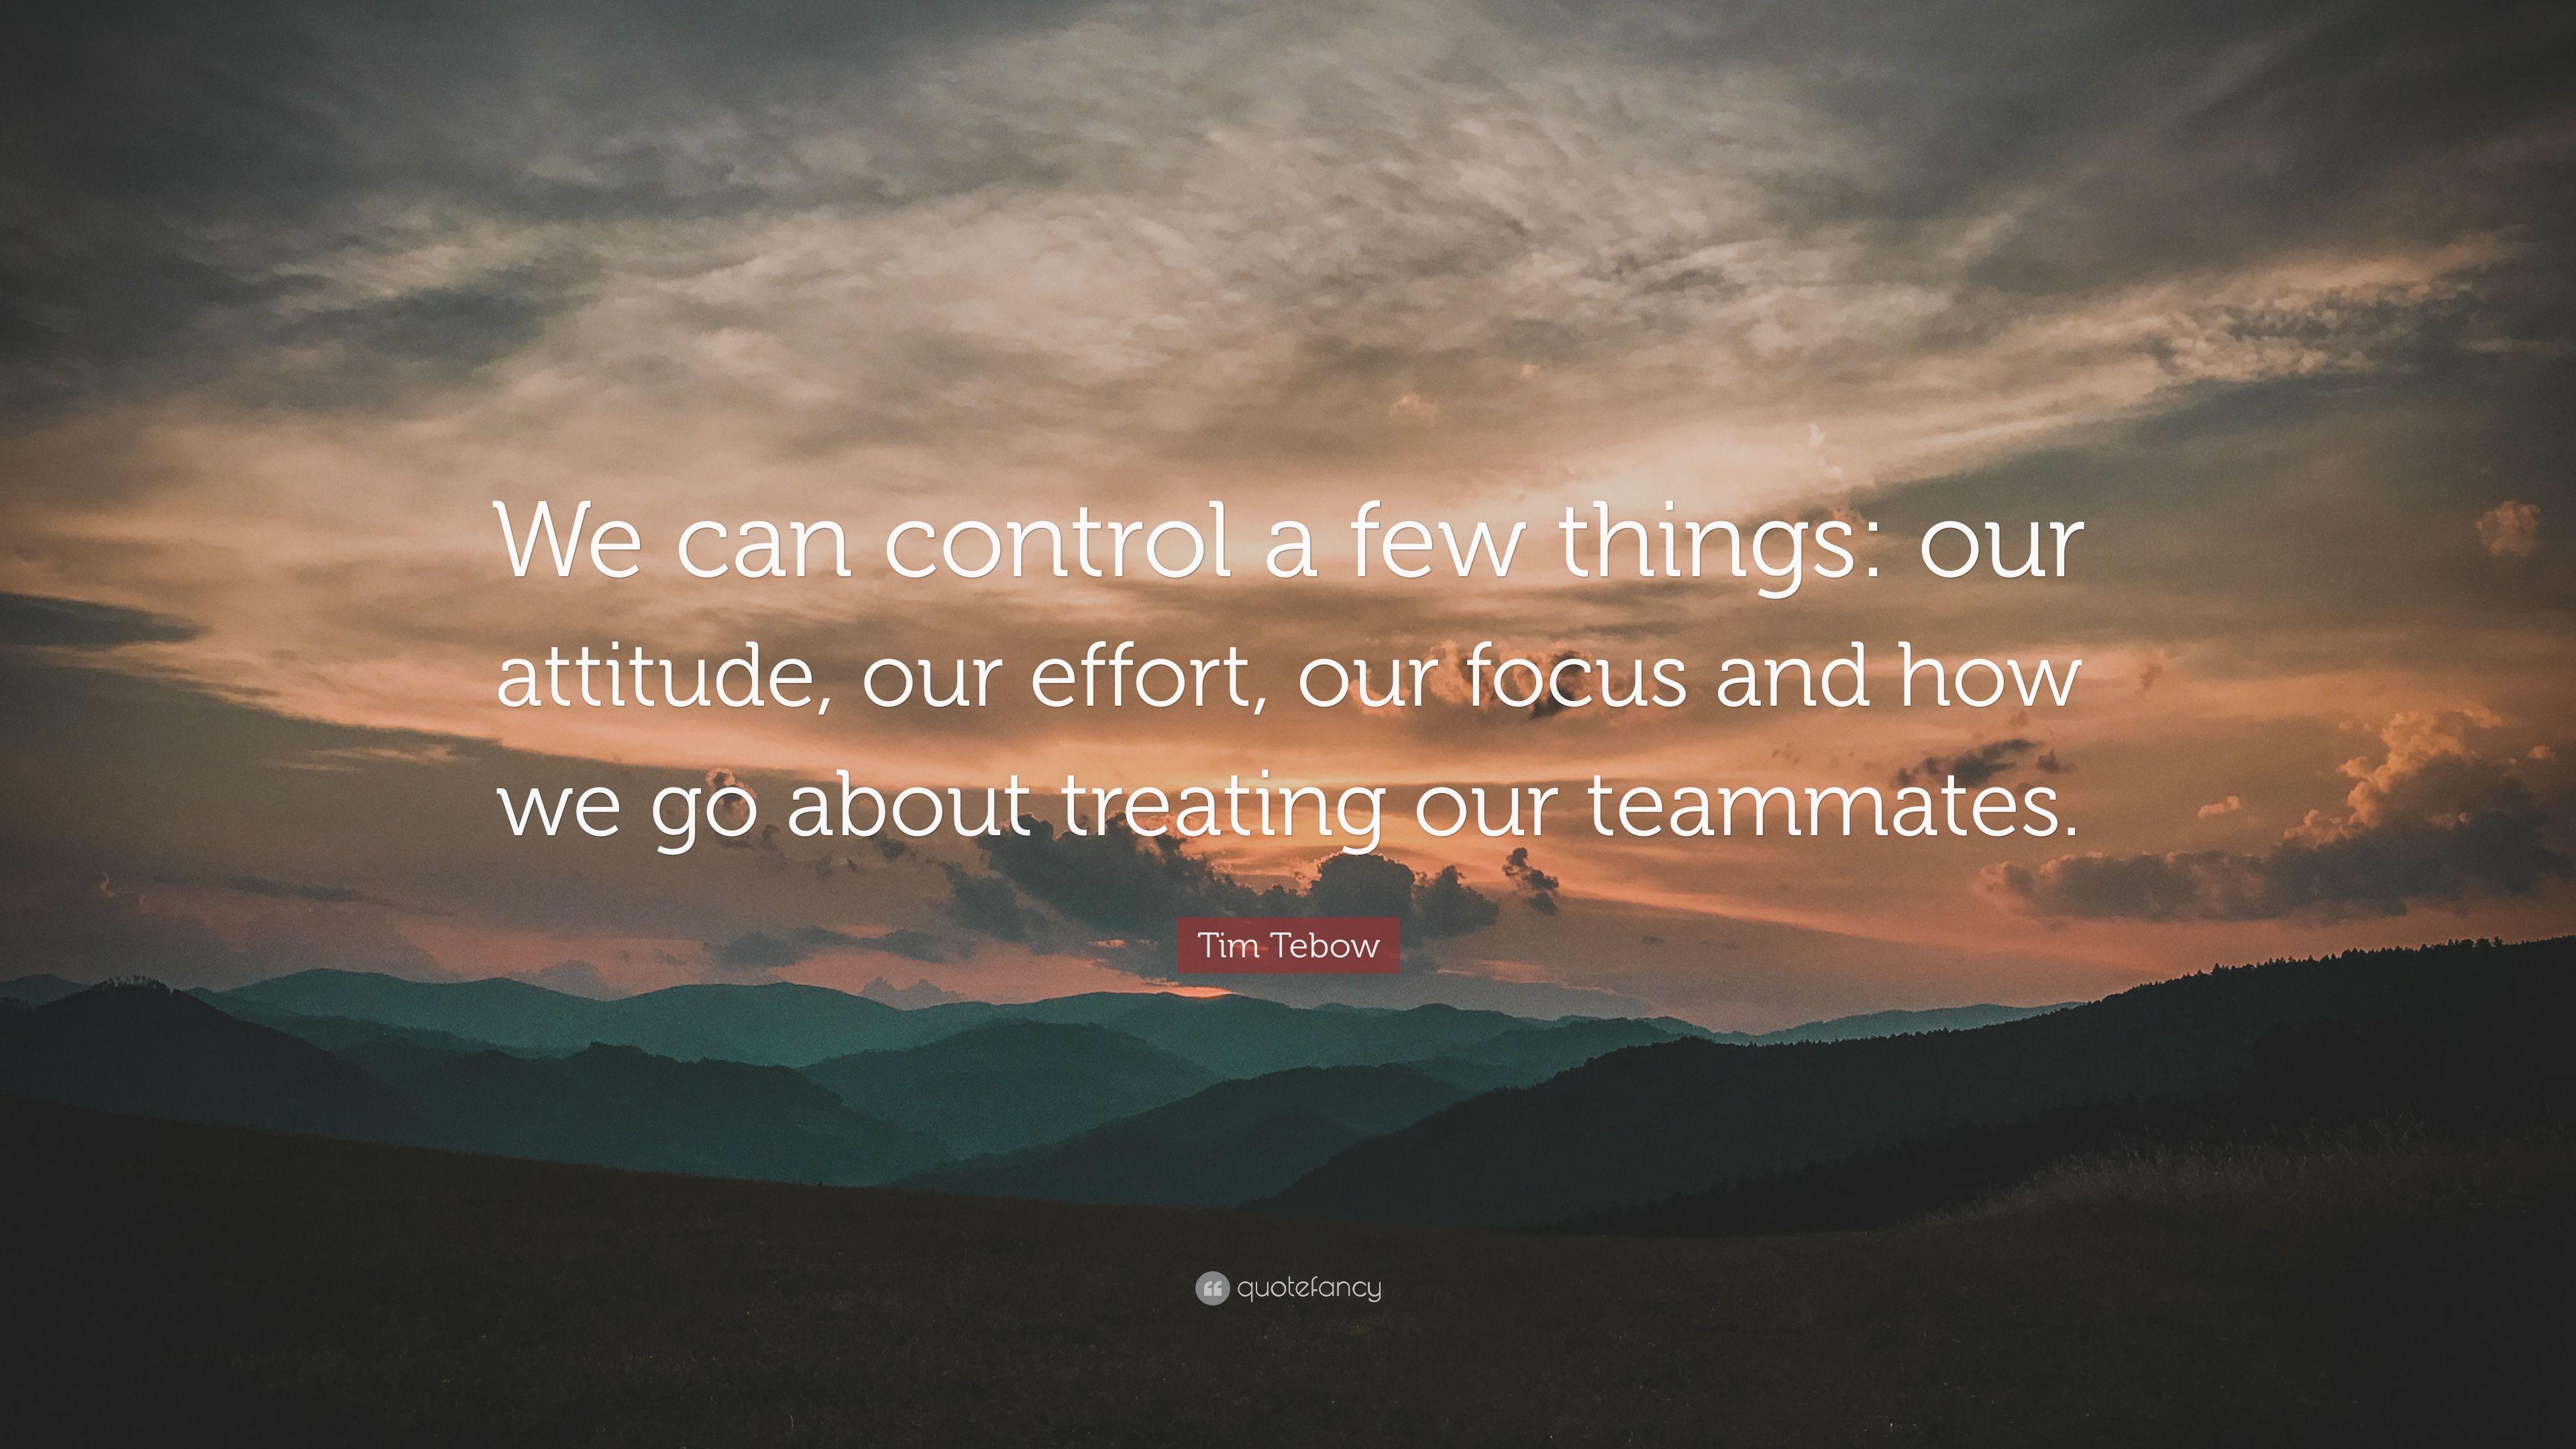 Tim Tebow Quote: “We can control a few things: our attitude, our